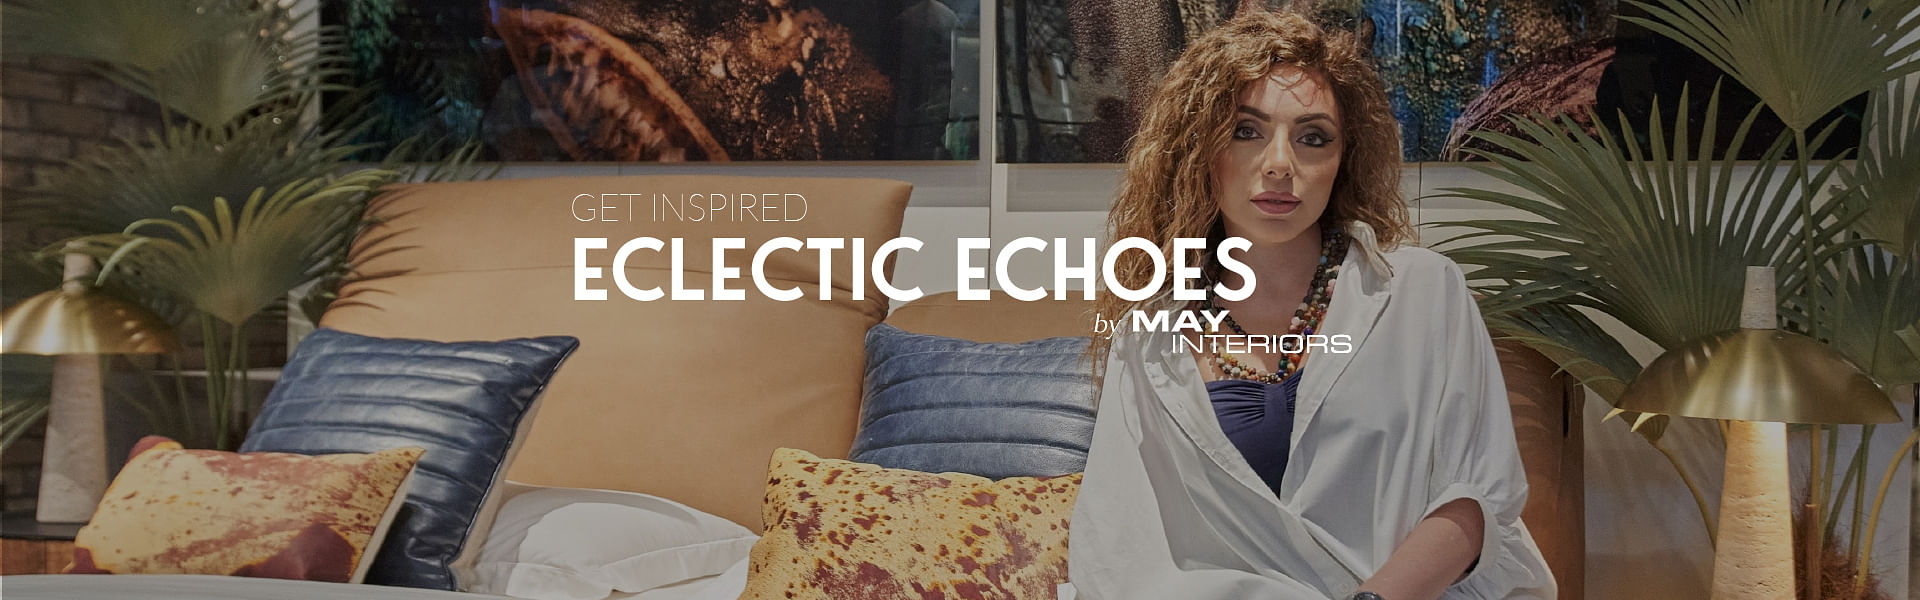 Eclectic Echoes